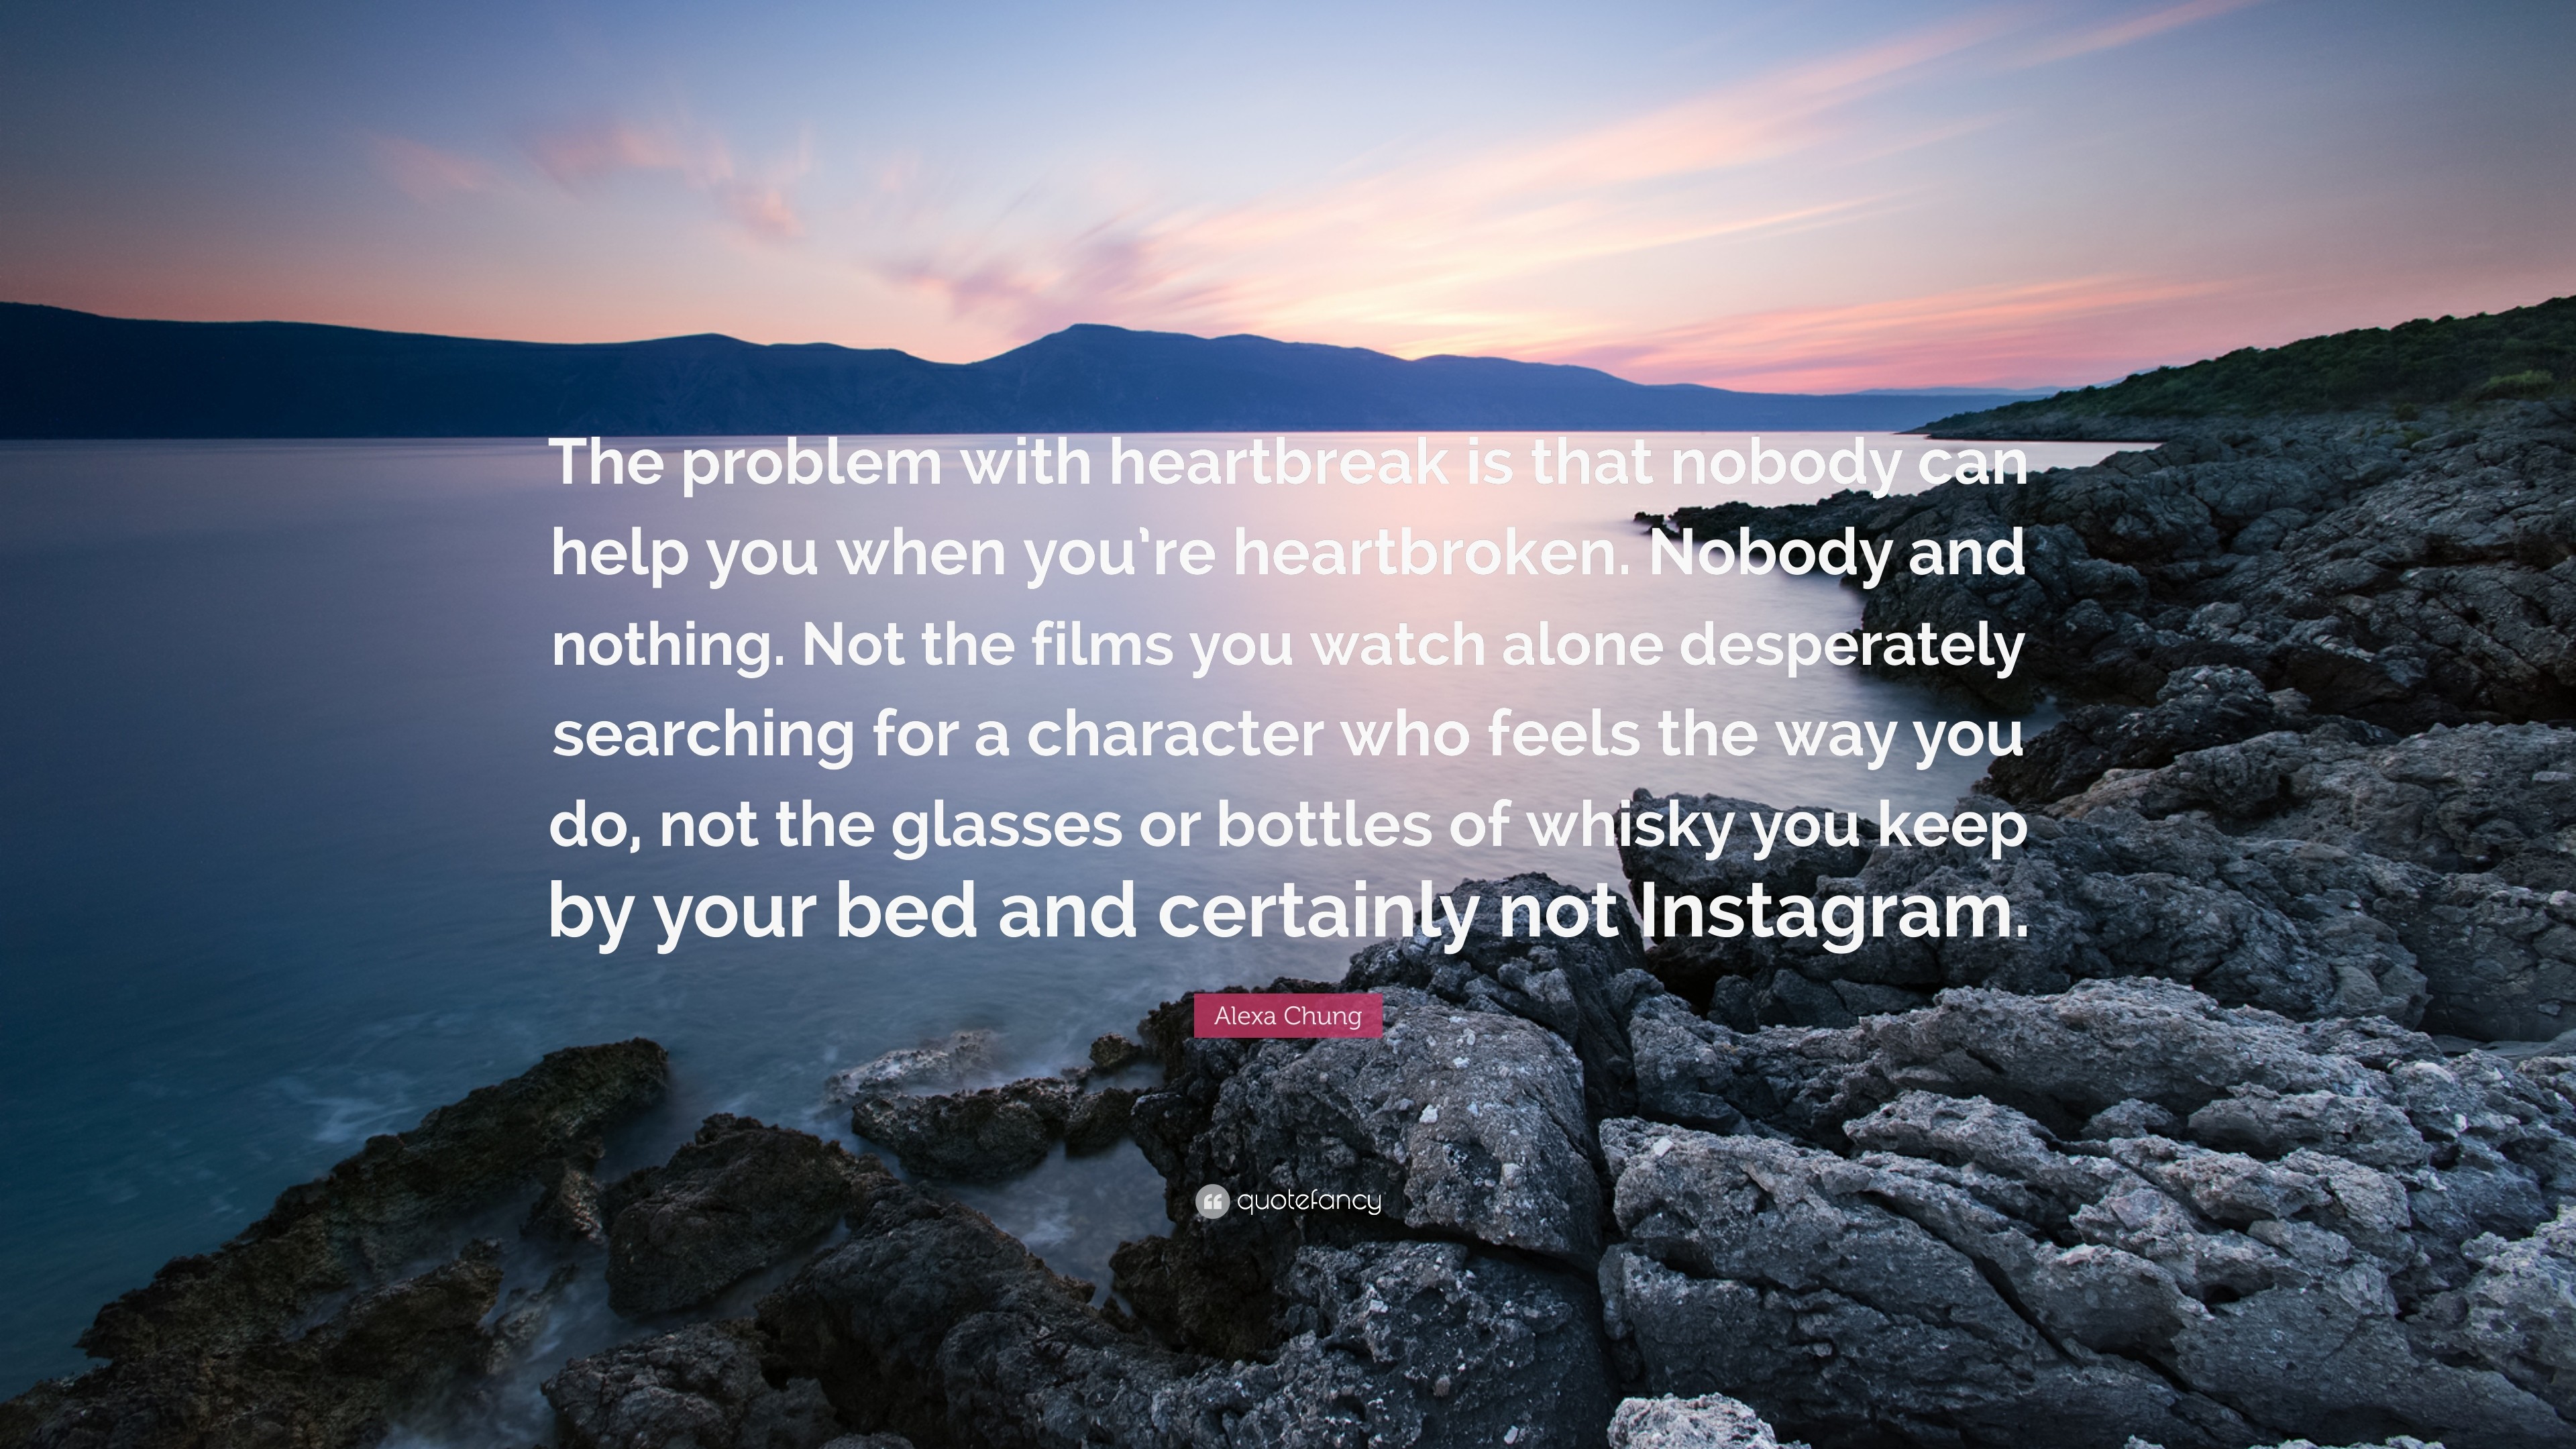 3840x2160 Alexa Chung Quote: “The problem with heartbreak is that nobody can help you  when